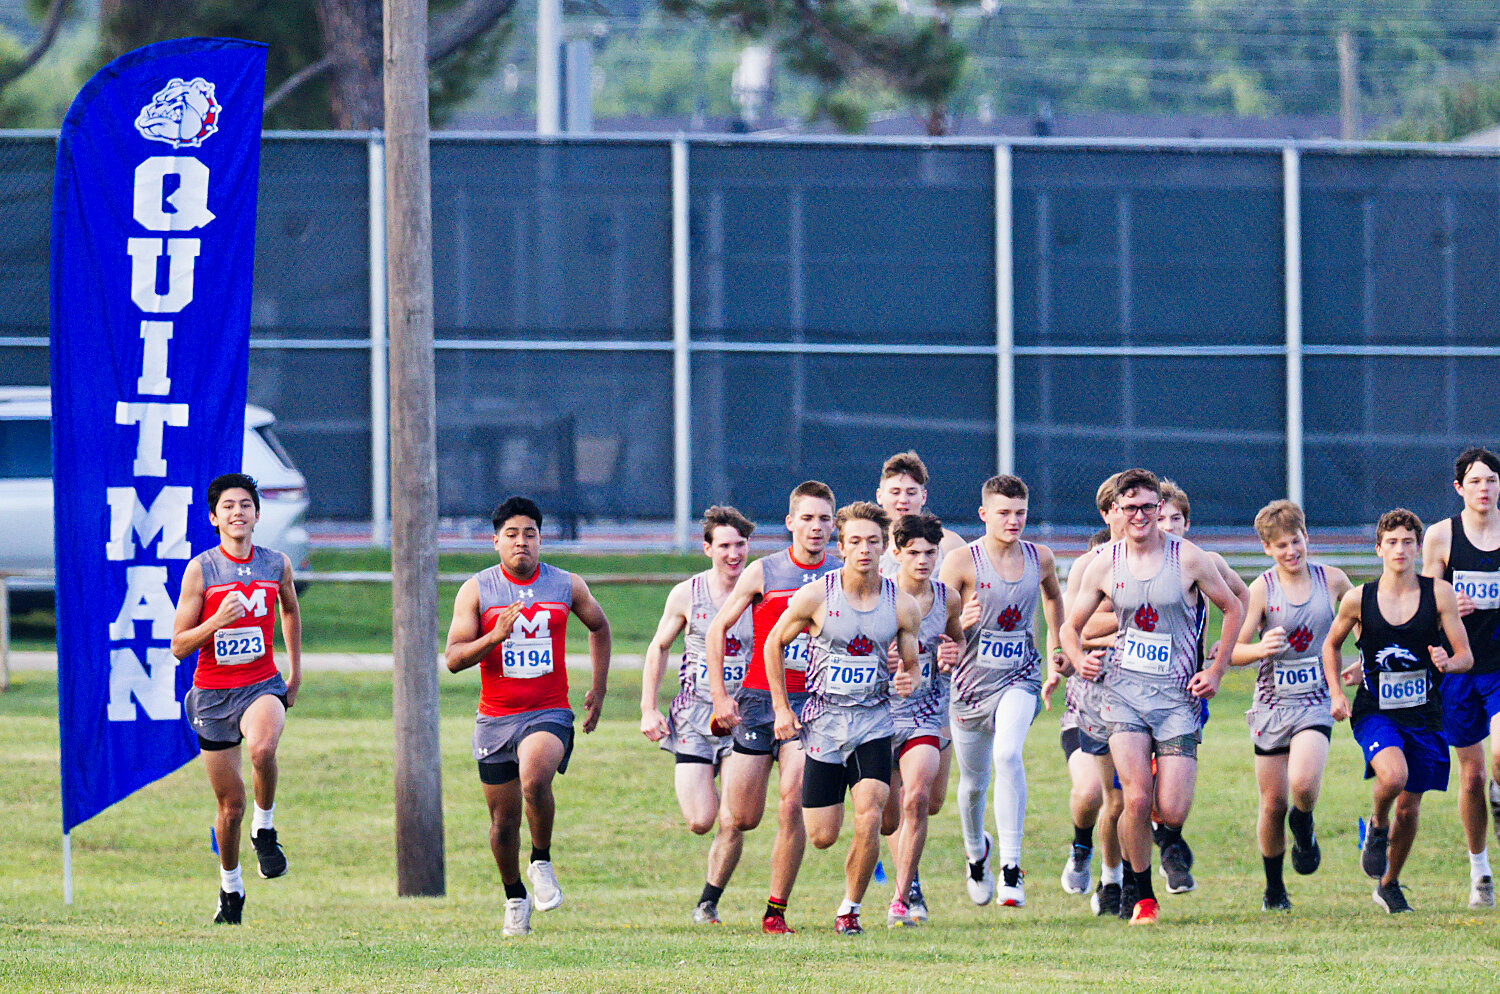 The varsity boys cross country teams for Mineola and Alba-Golden begin their meet at the Quitman invitational. [catch the cross-country competition]